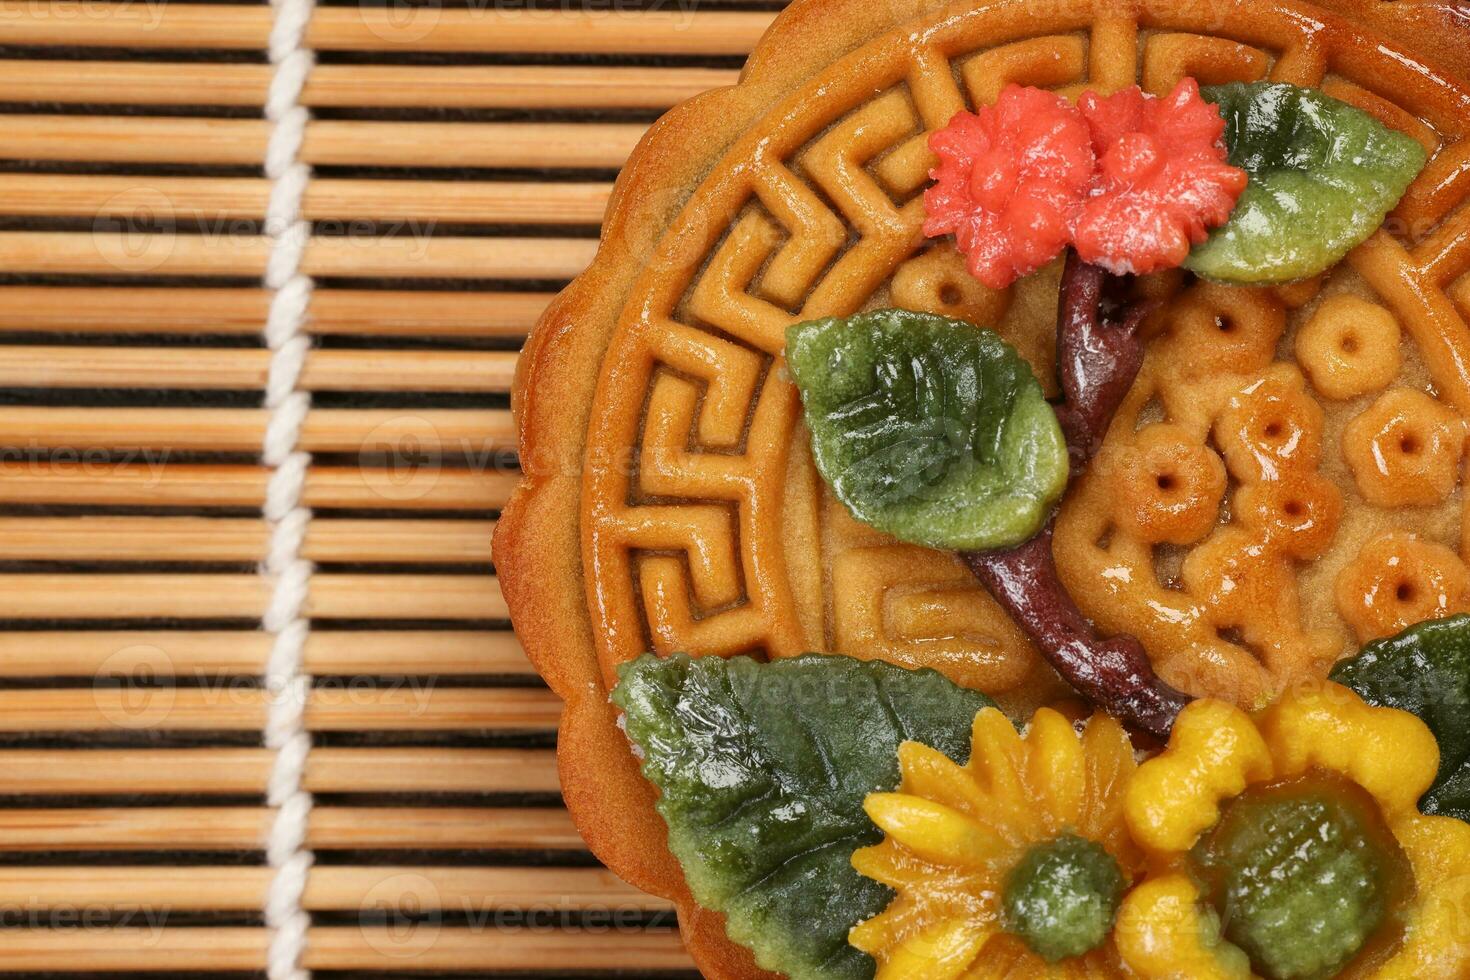 Colorful flower decorated mooncake Chinese mid autumn festival on bamboo food mat background photo